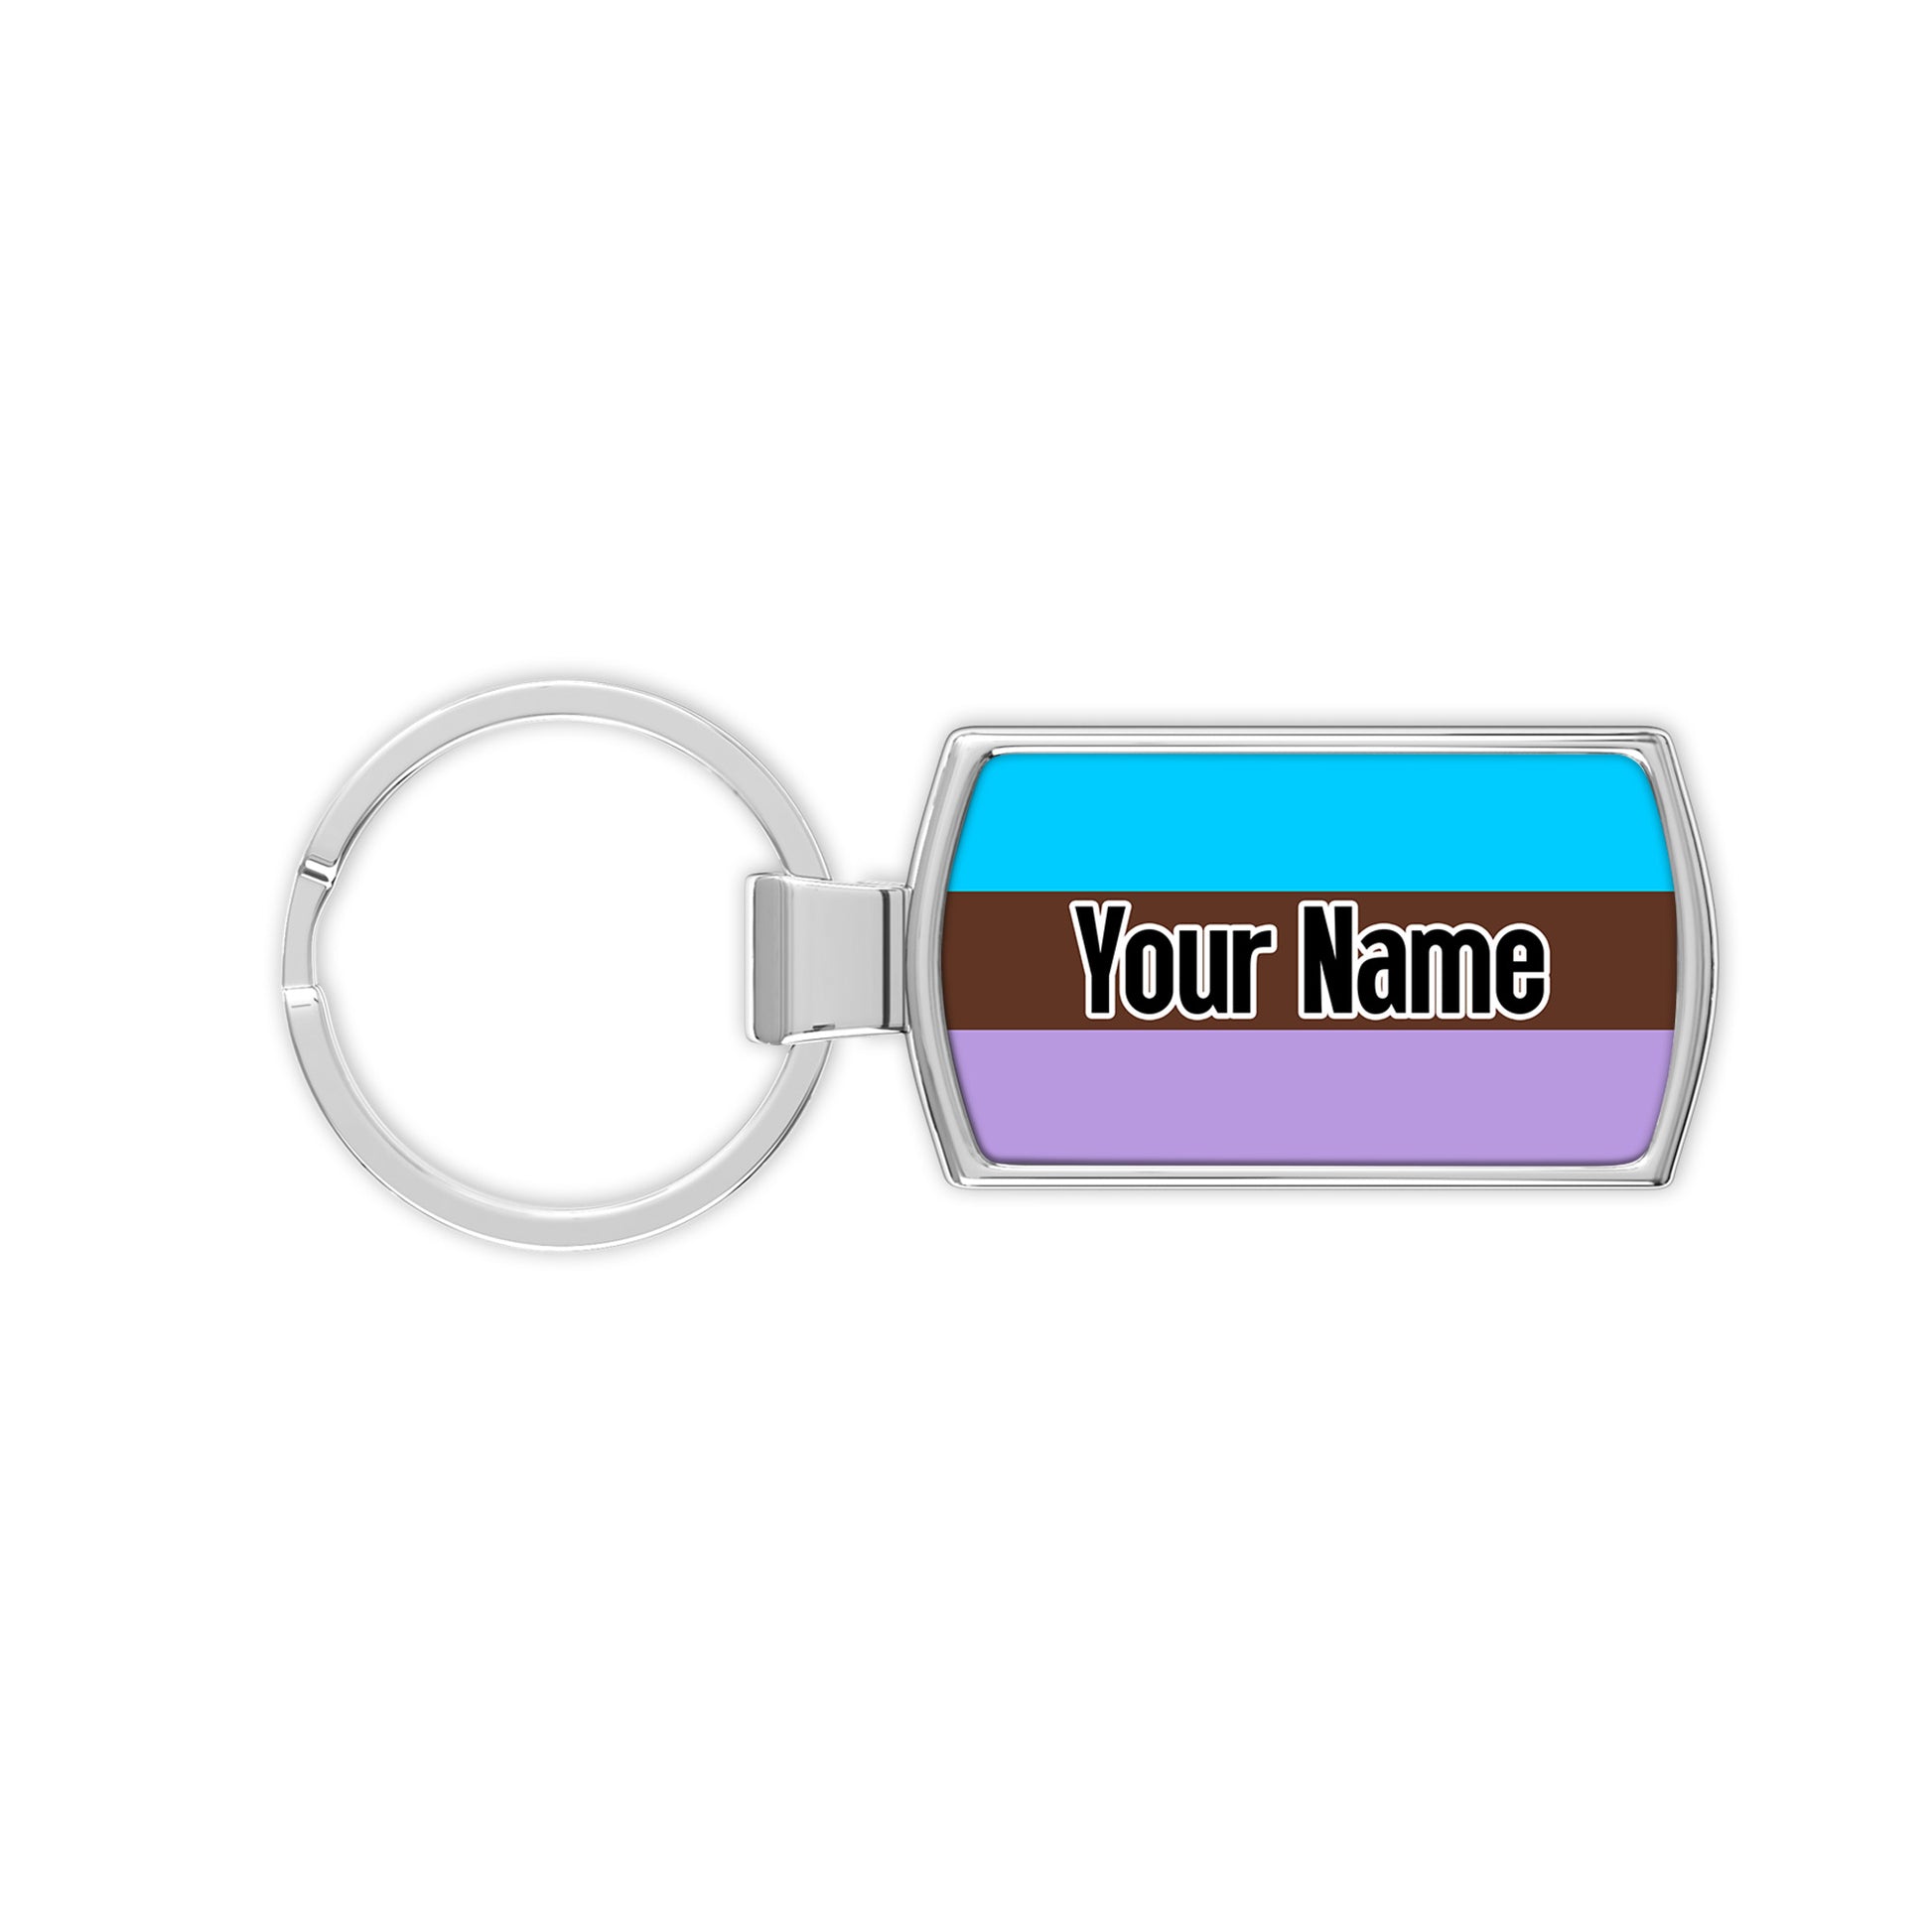 Androsexual flag personalised chrome keyring